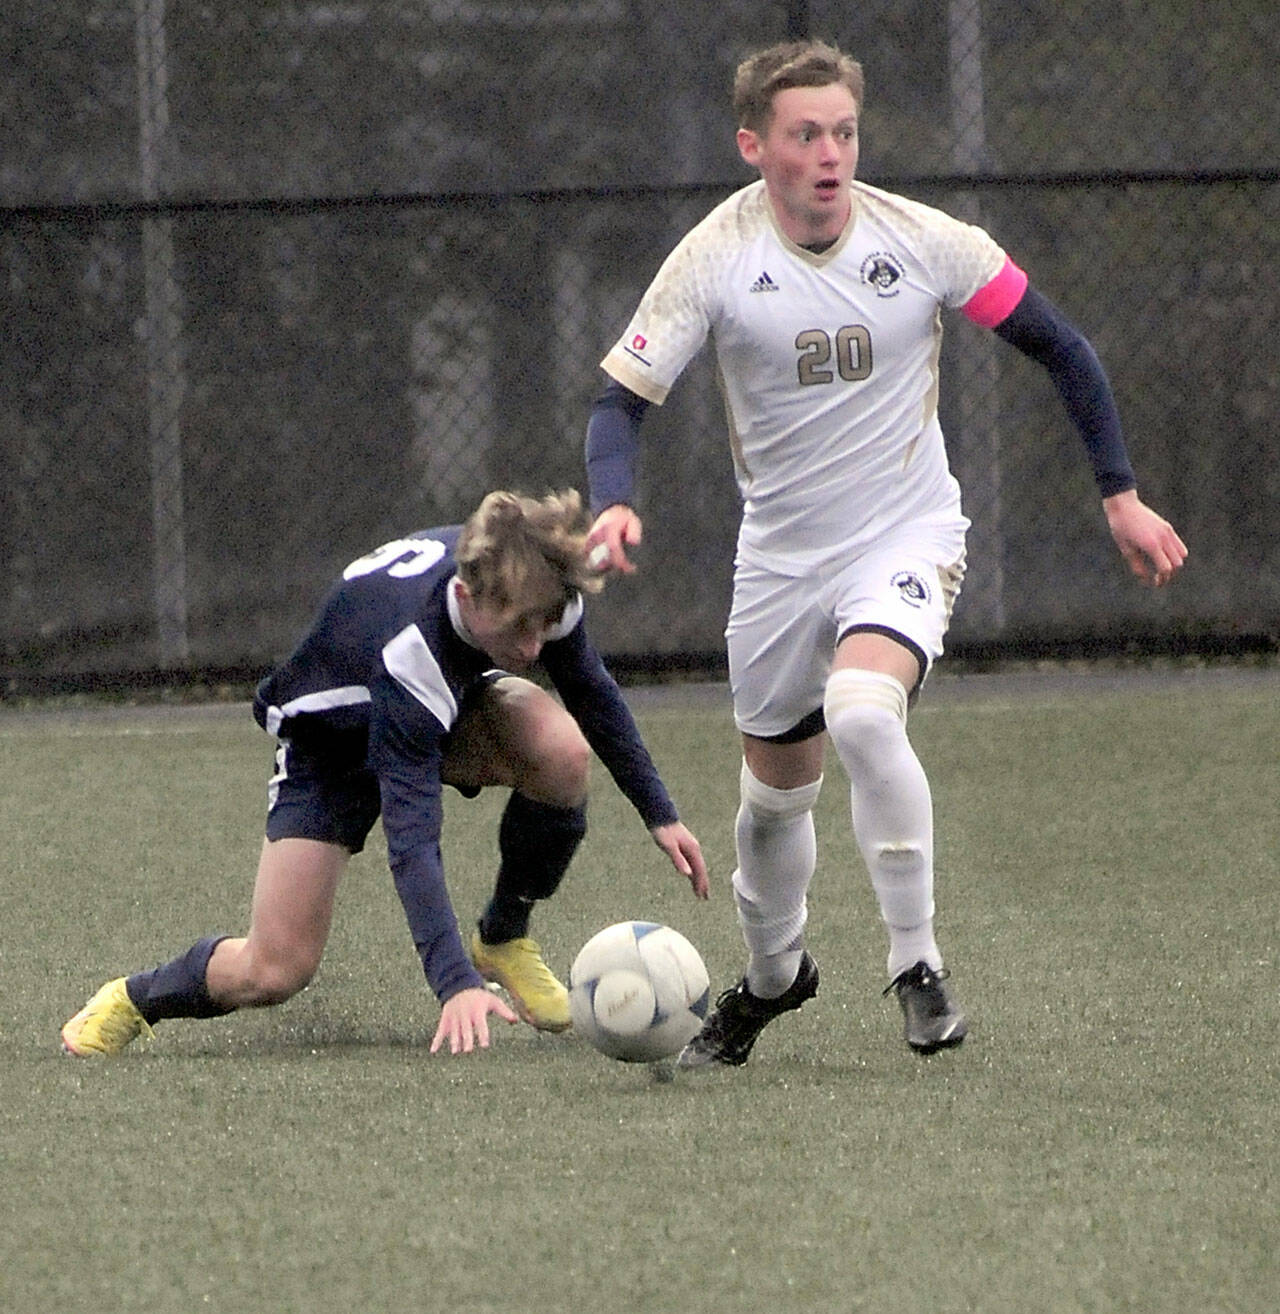 KEITH THORPE/PENINSULA DAILY NEWS
Peninsula's Gabriel Kiekenbeck, right, gets up with the ball after getting tangled with Bellevue's Sebastian Bednick during Wednesday's match in Port Angeles.